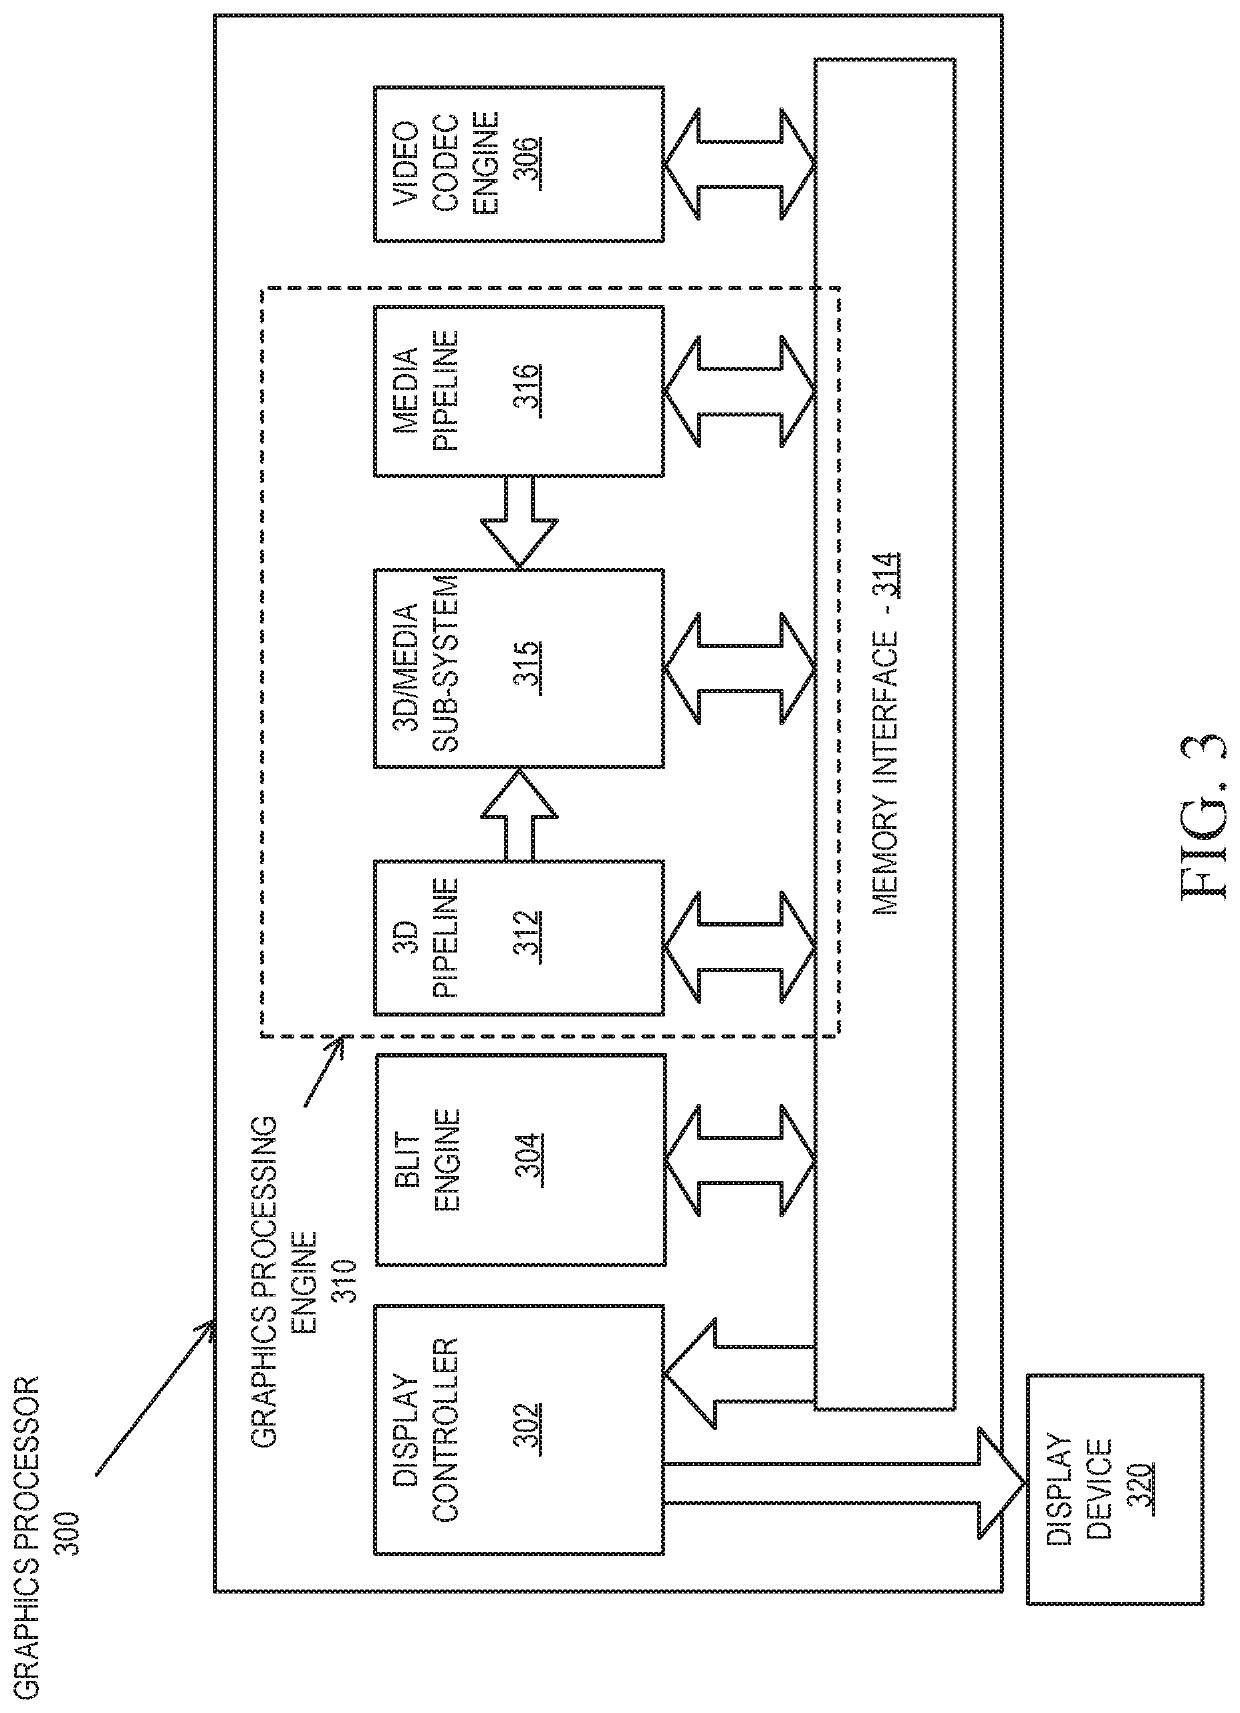 Multi-pass apparatus and method for early termination of graphics shading